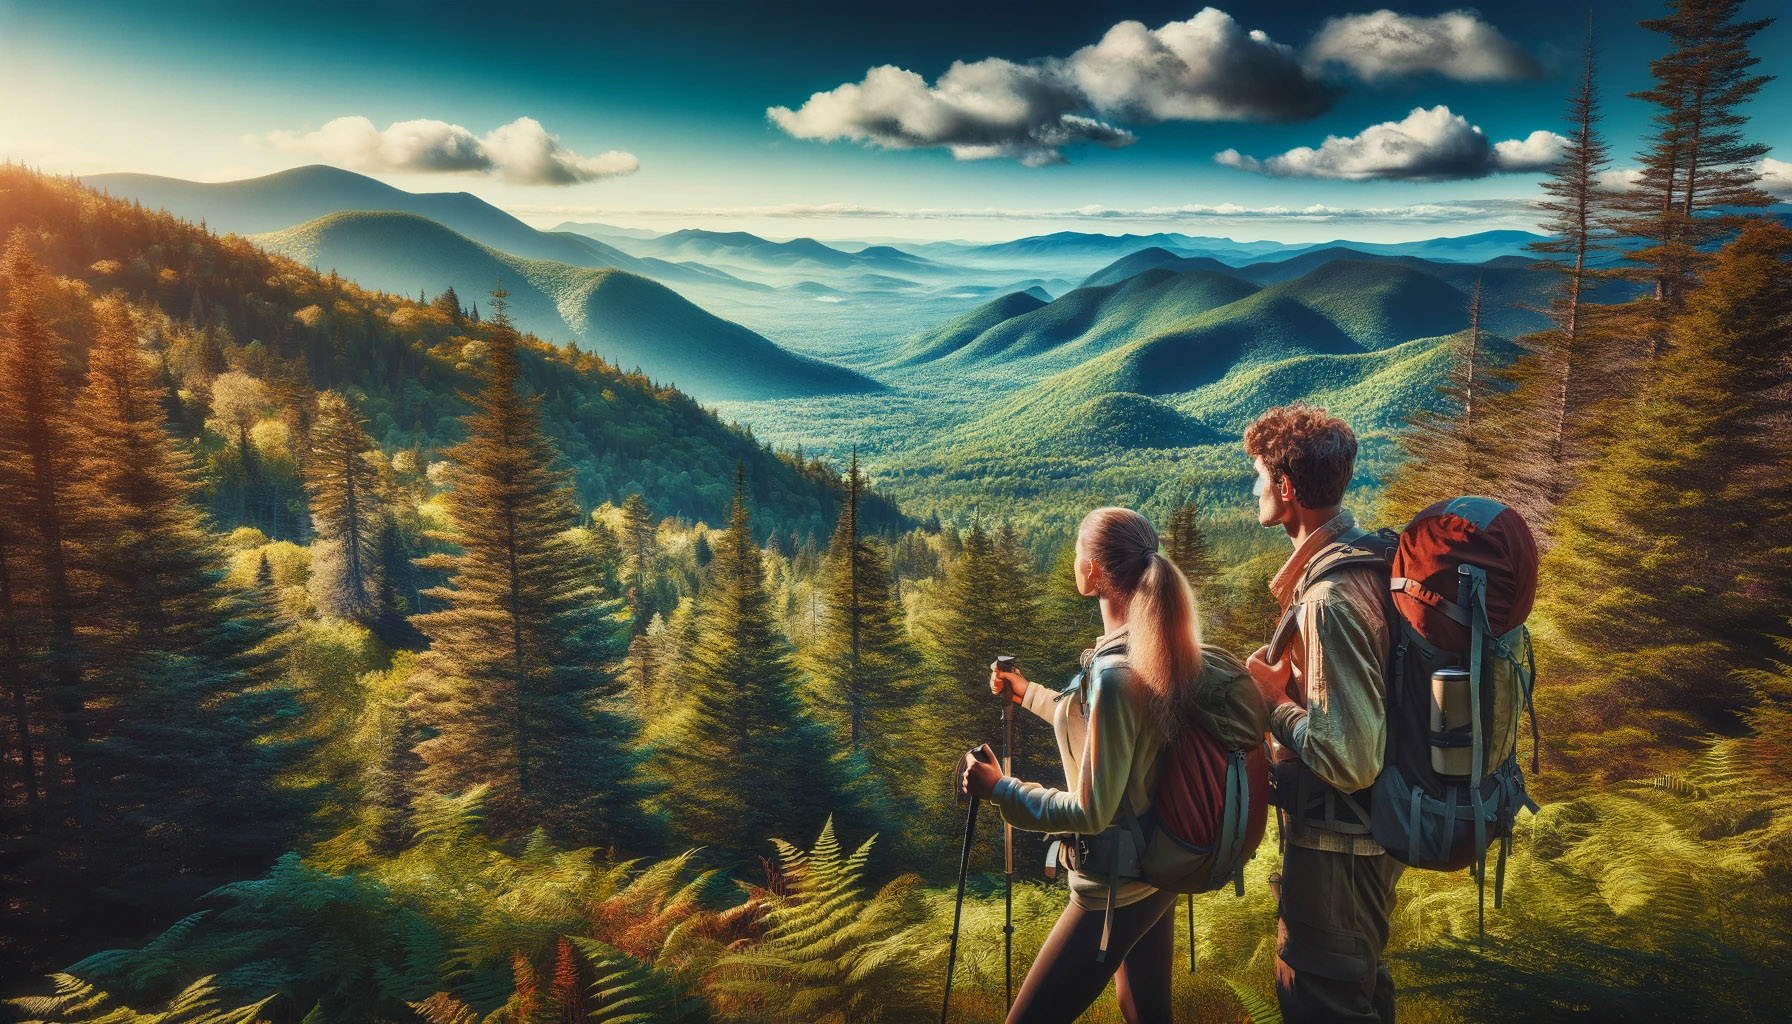 A female and male hiker in the Adirondack Mountains of Upstate New York. The scene captures the essence of the untamed wilderness with dense forests,